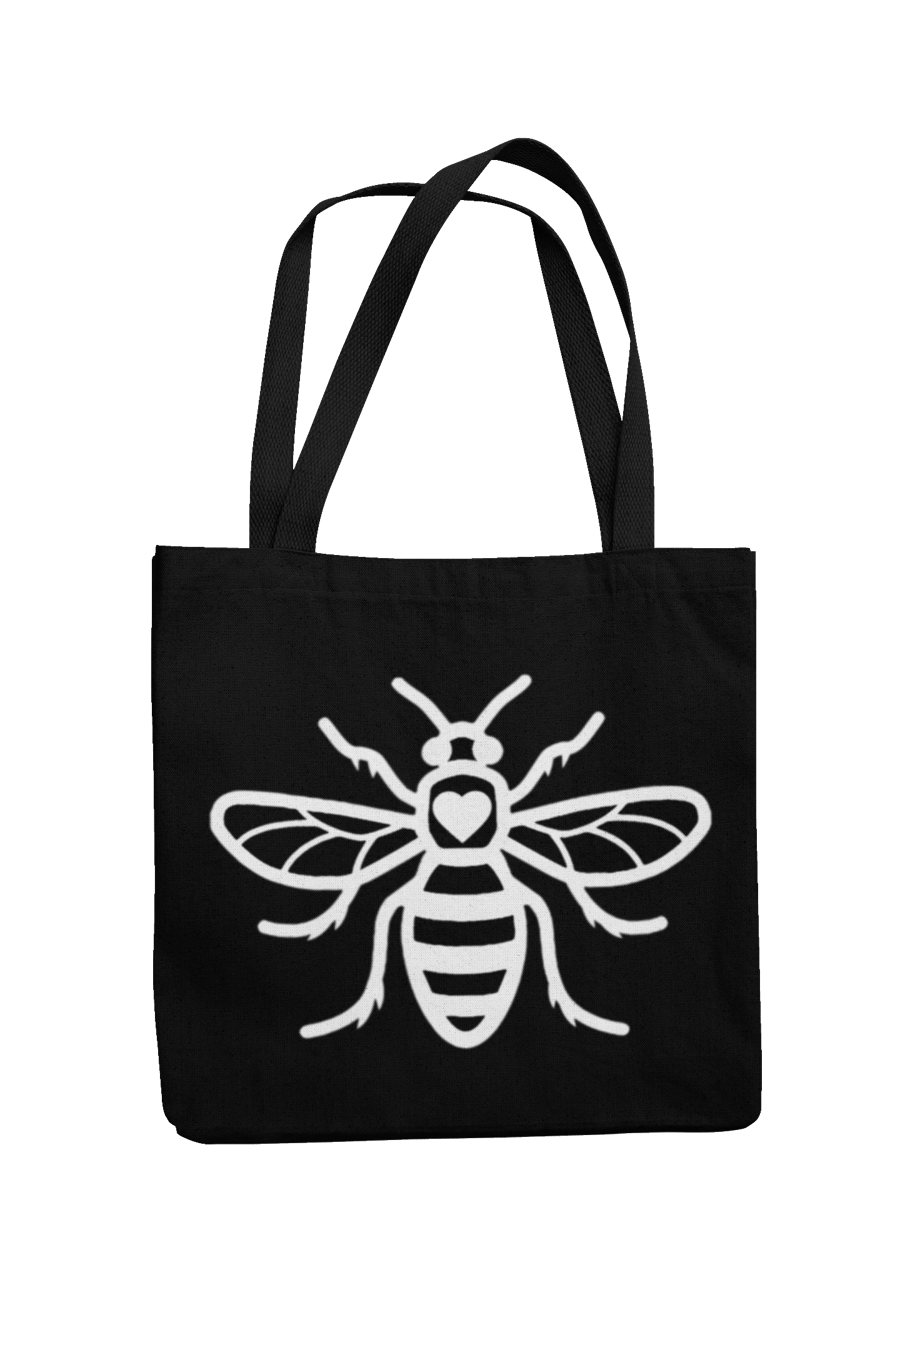 Manchester Bee Tote Bag - Bee ( loveheart)